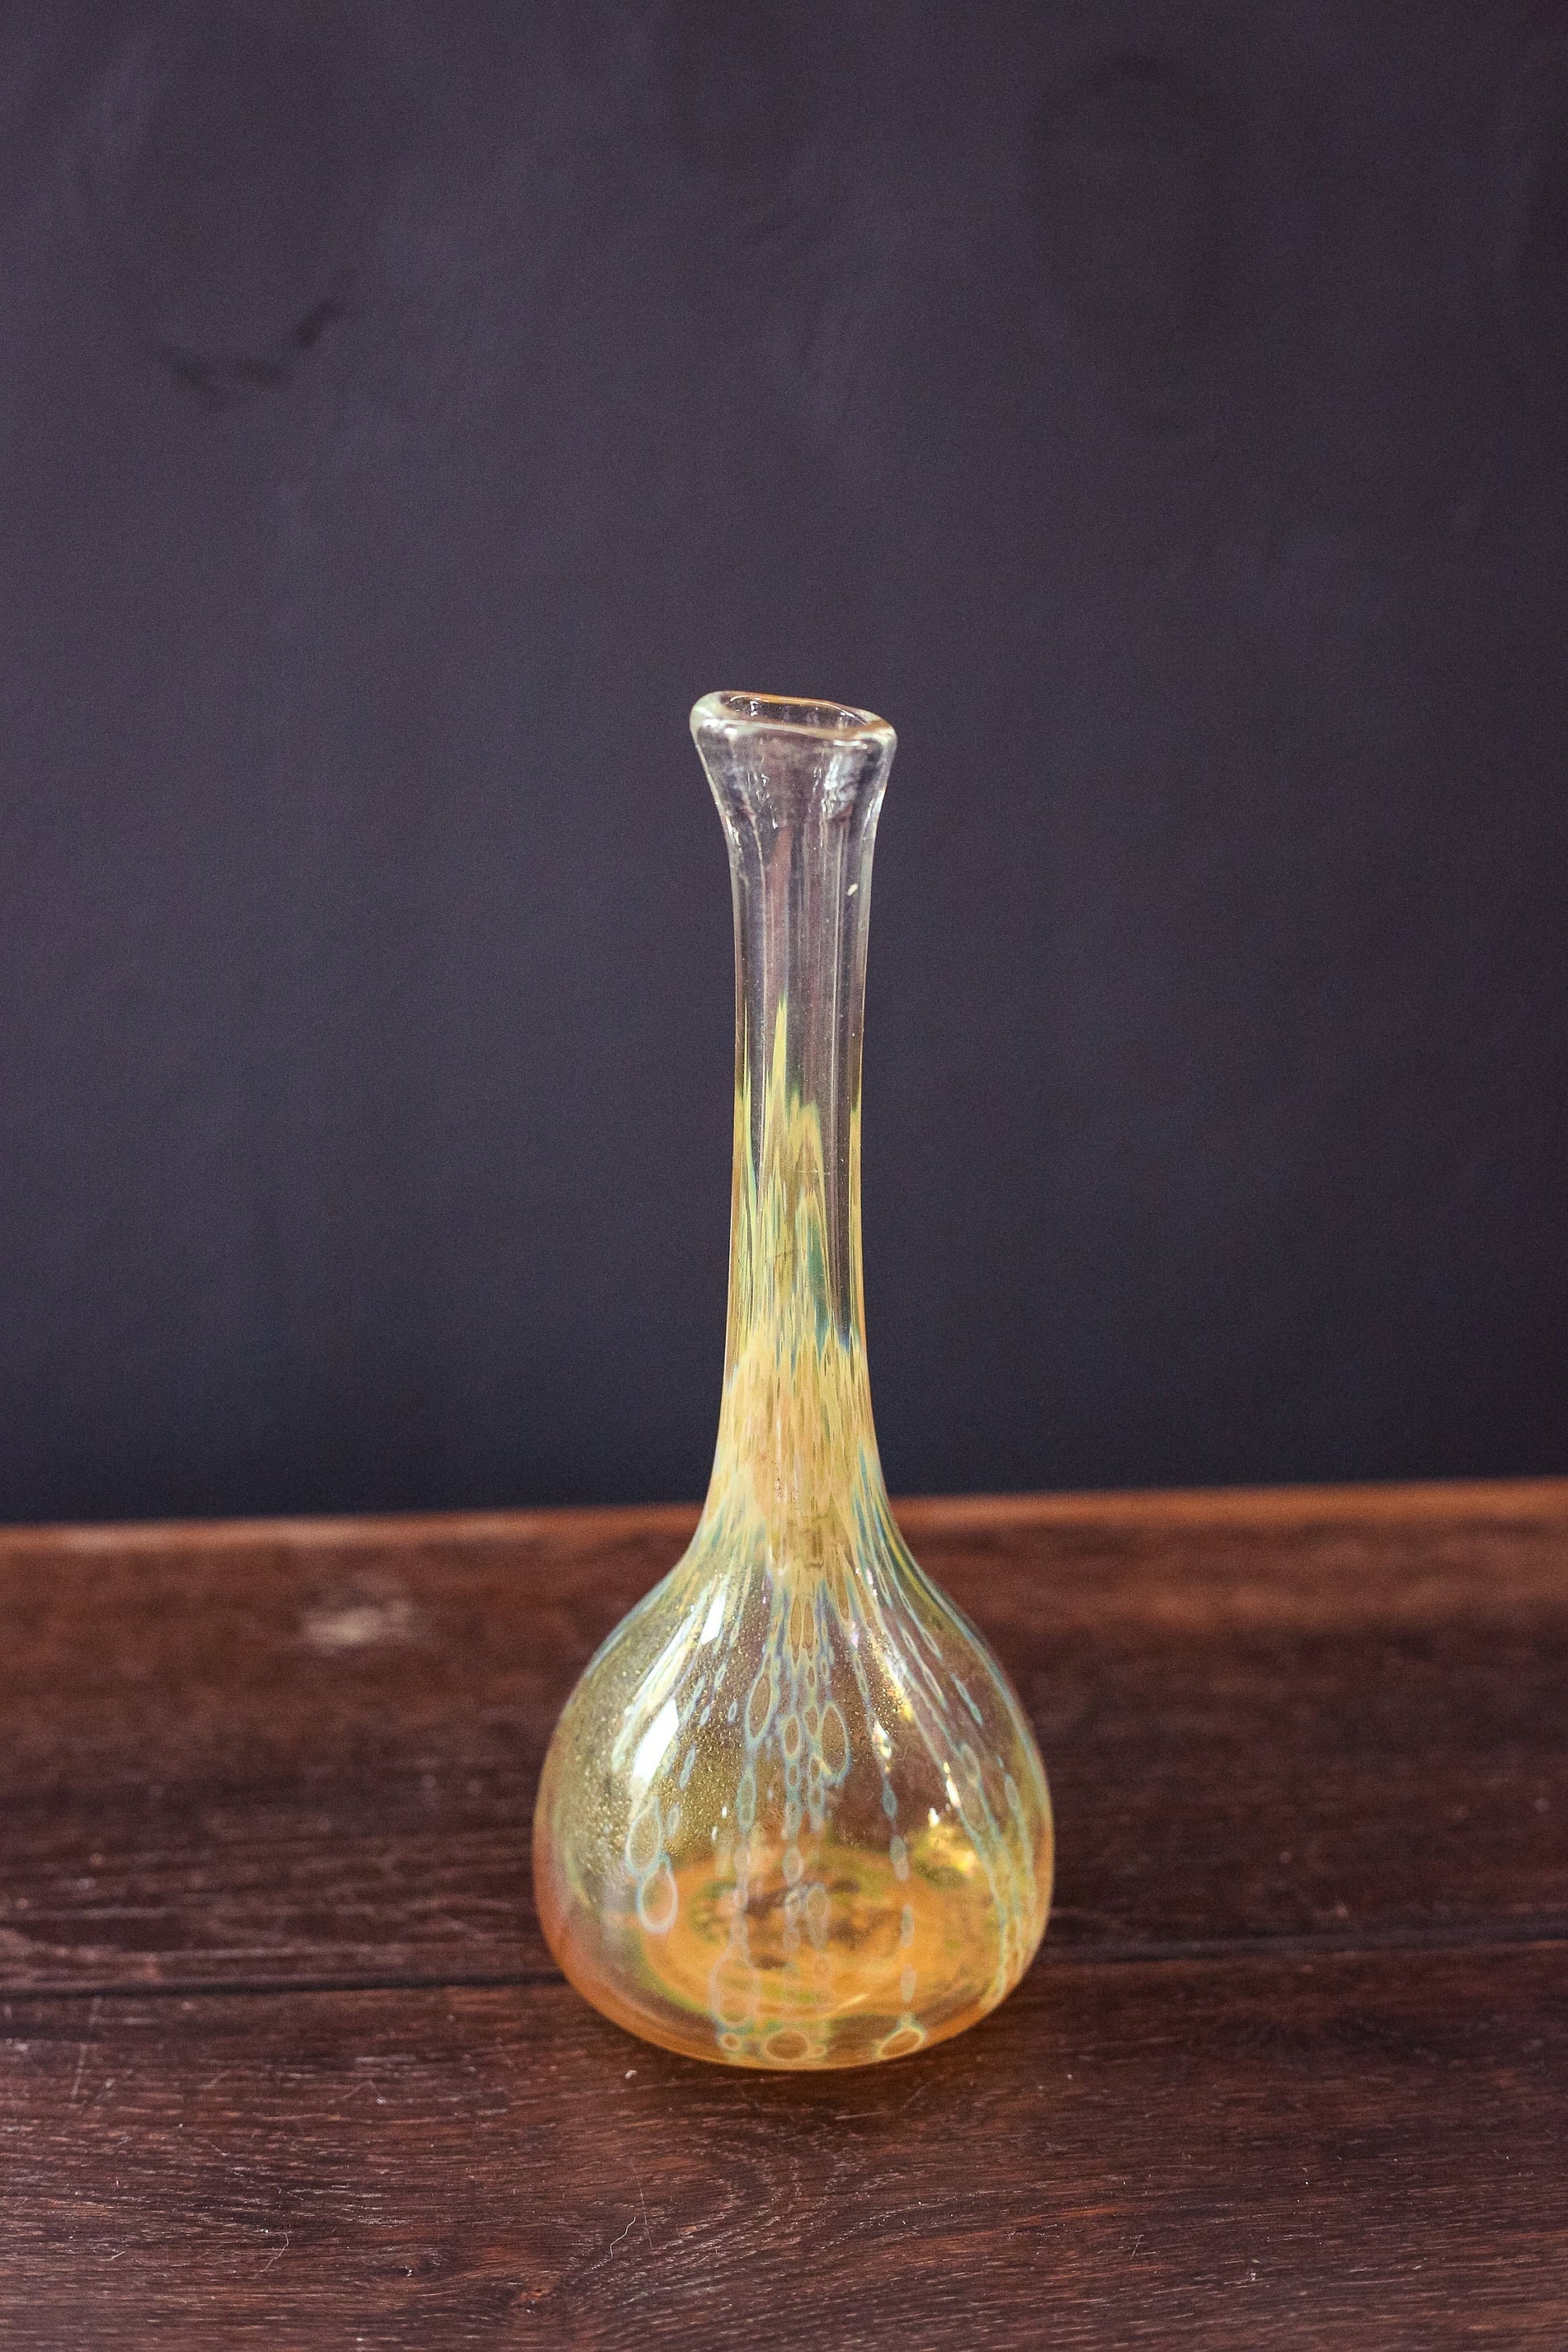 Yellow and Clear Studio Glass Vase with Iridescent Finish - Vintage Hand Blow Glass Bud Vase